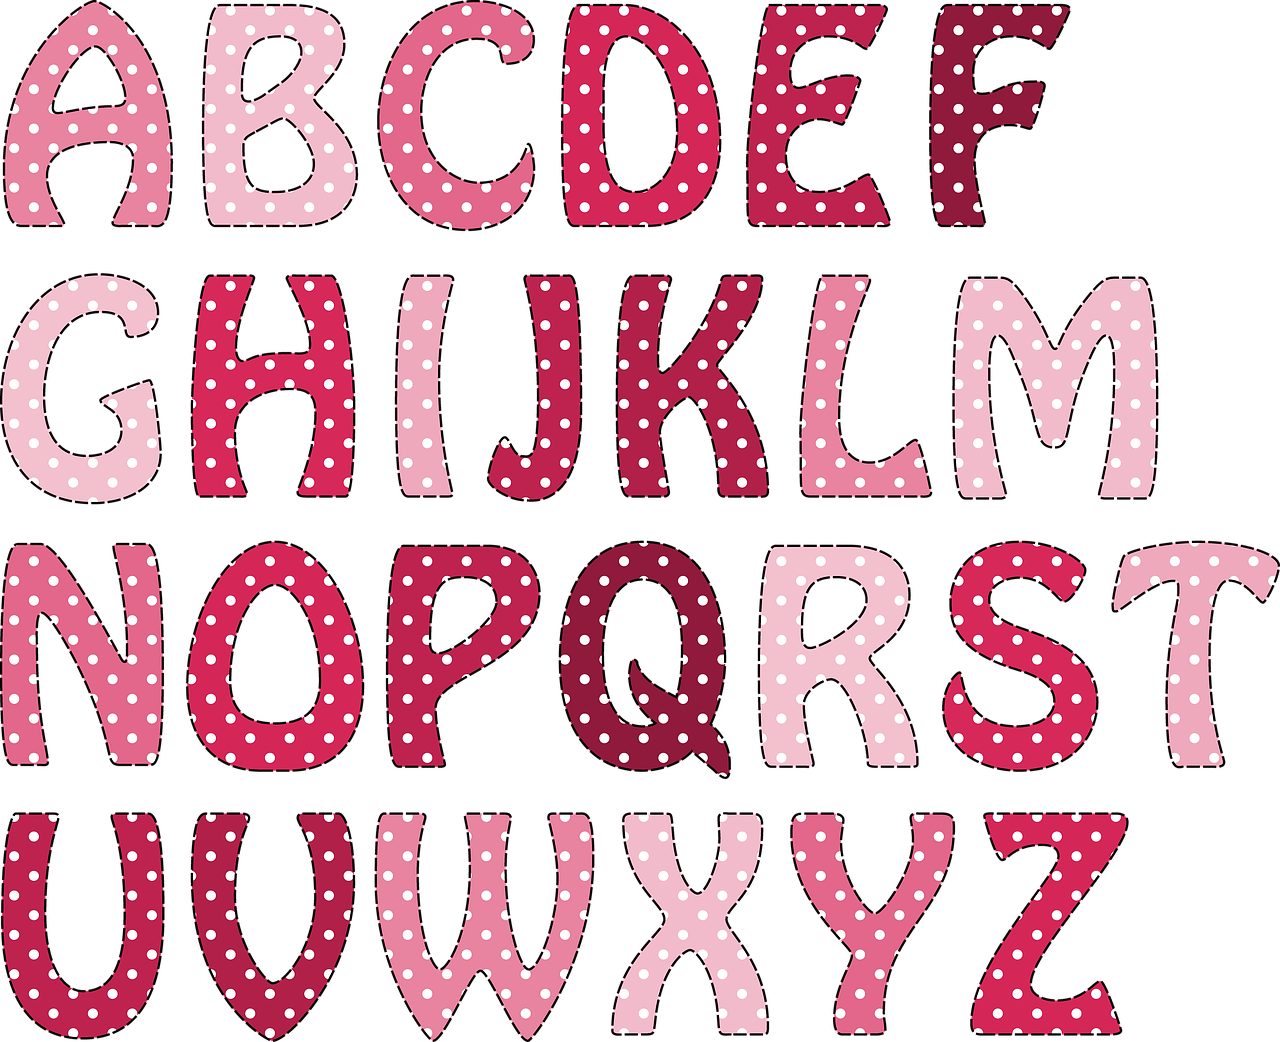 Download Free Photo Of Alphabet Pink Kids Text Letter From Needpix Com